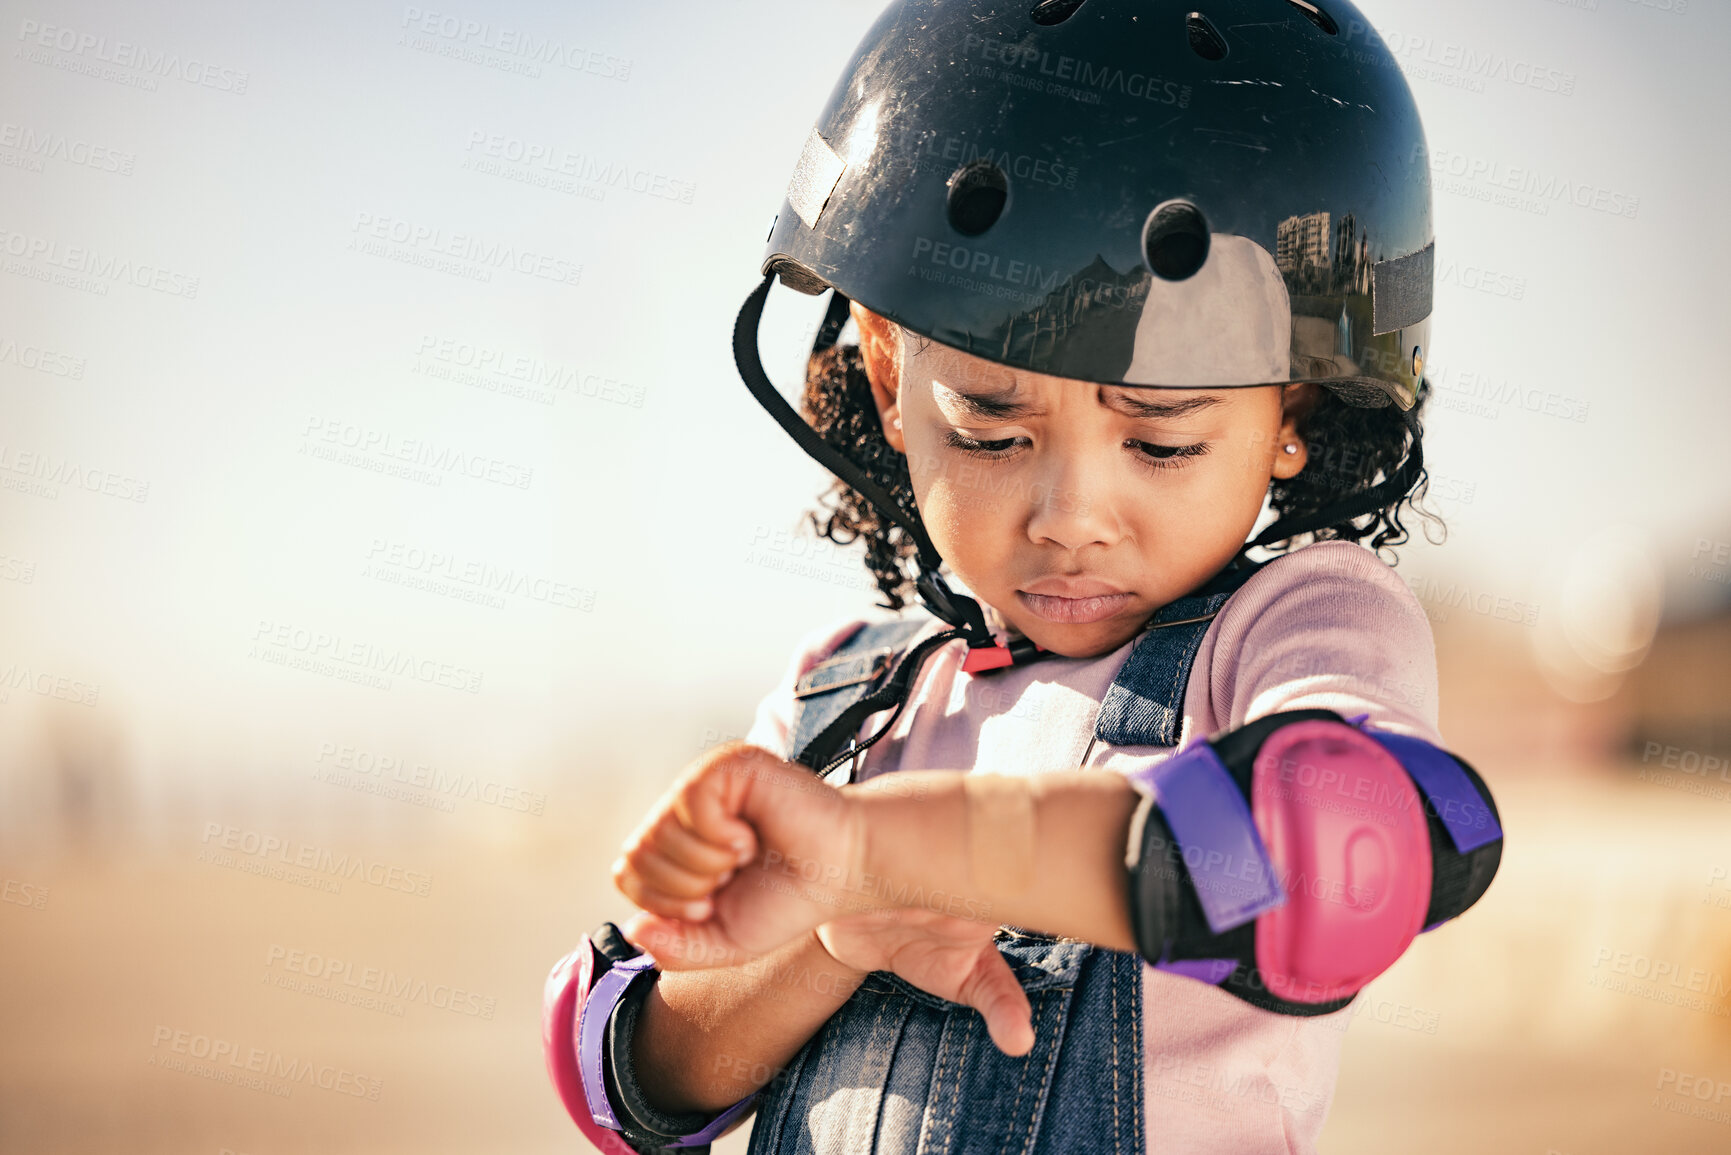 Buy stock photo Cycling injury, child and pain from a bike accident outdoor feeling stress and sadness. Young girl and summer cyclist or skating activity with a helmet and safety gear with arm bruise problem